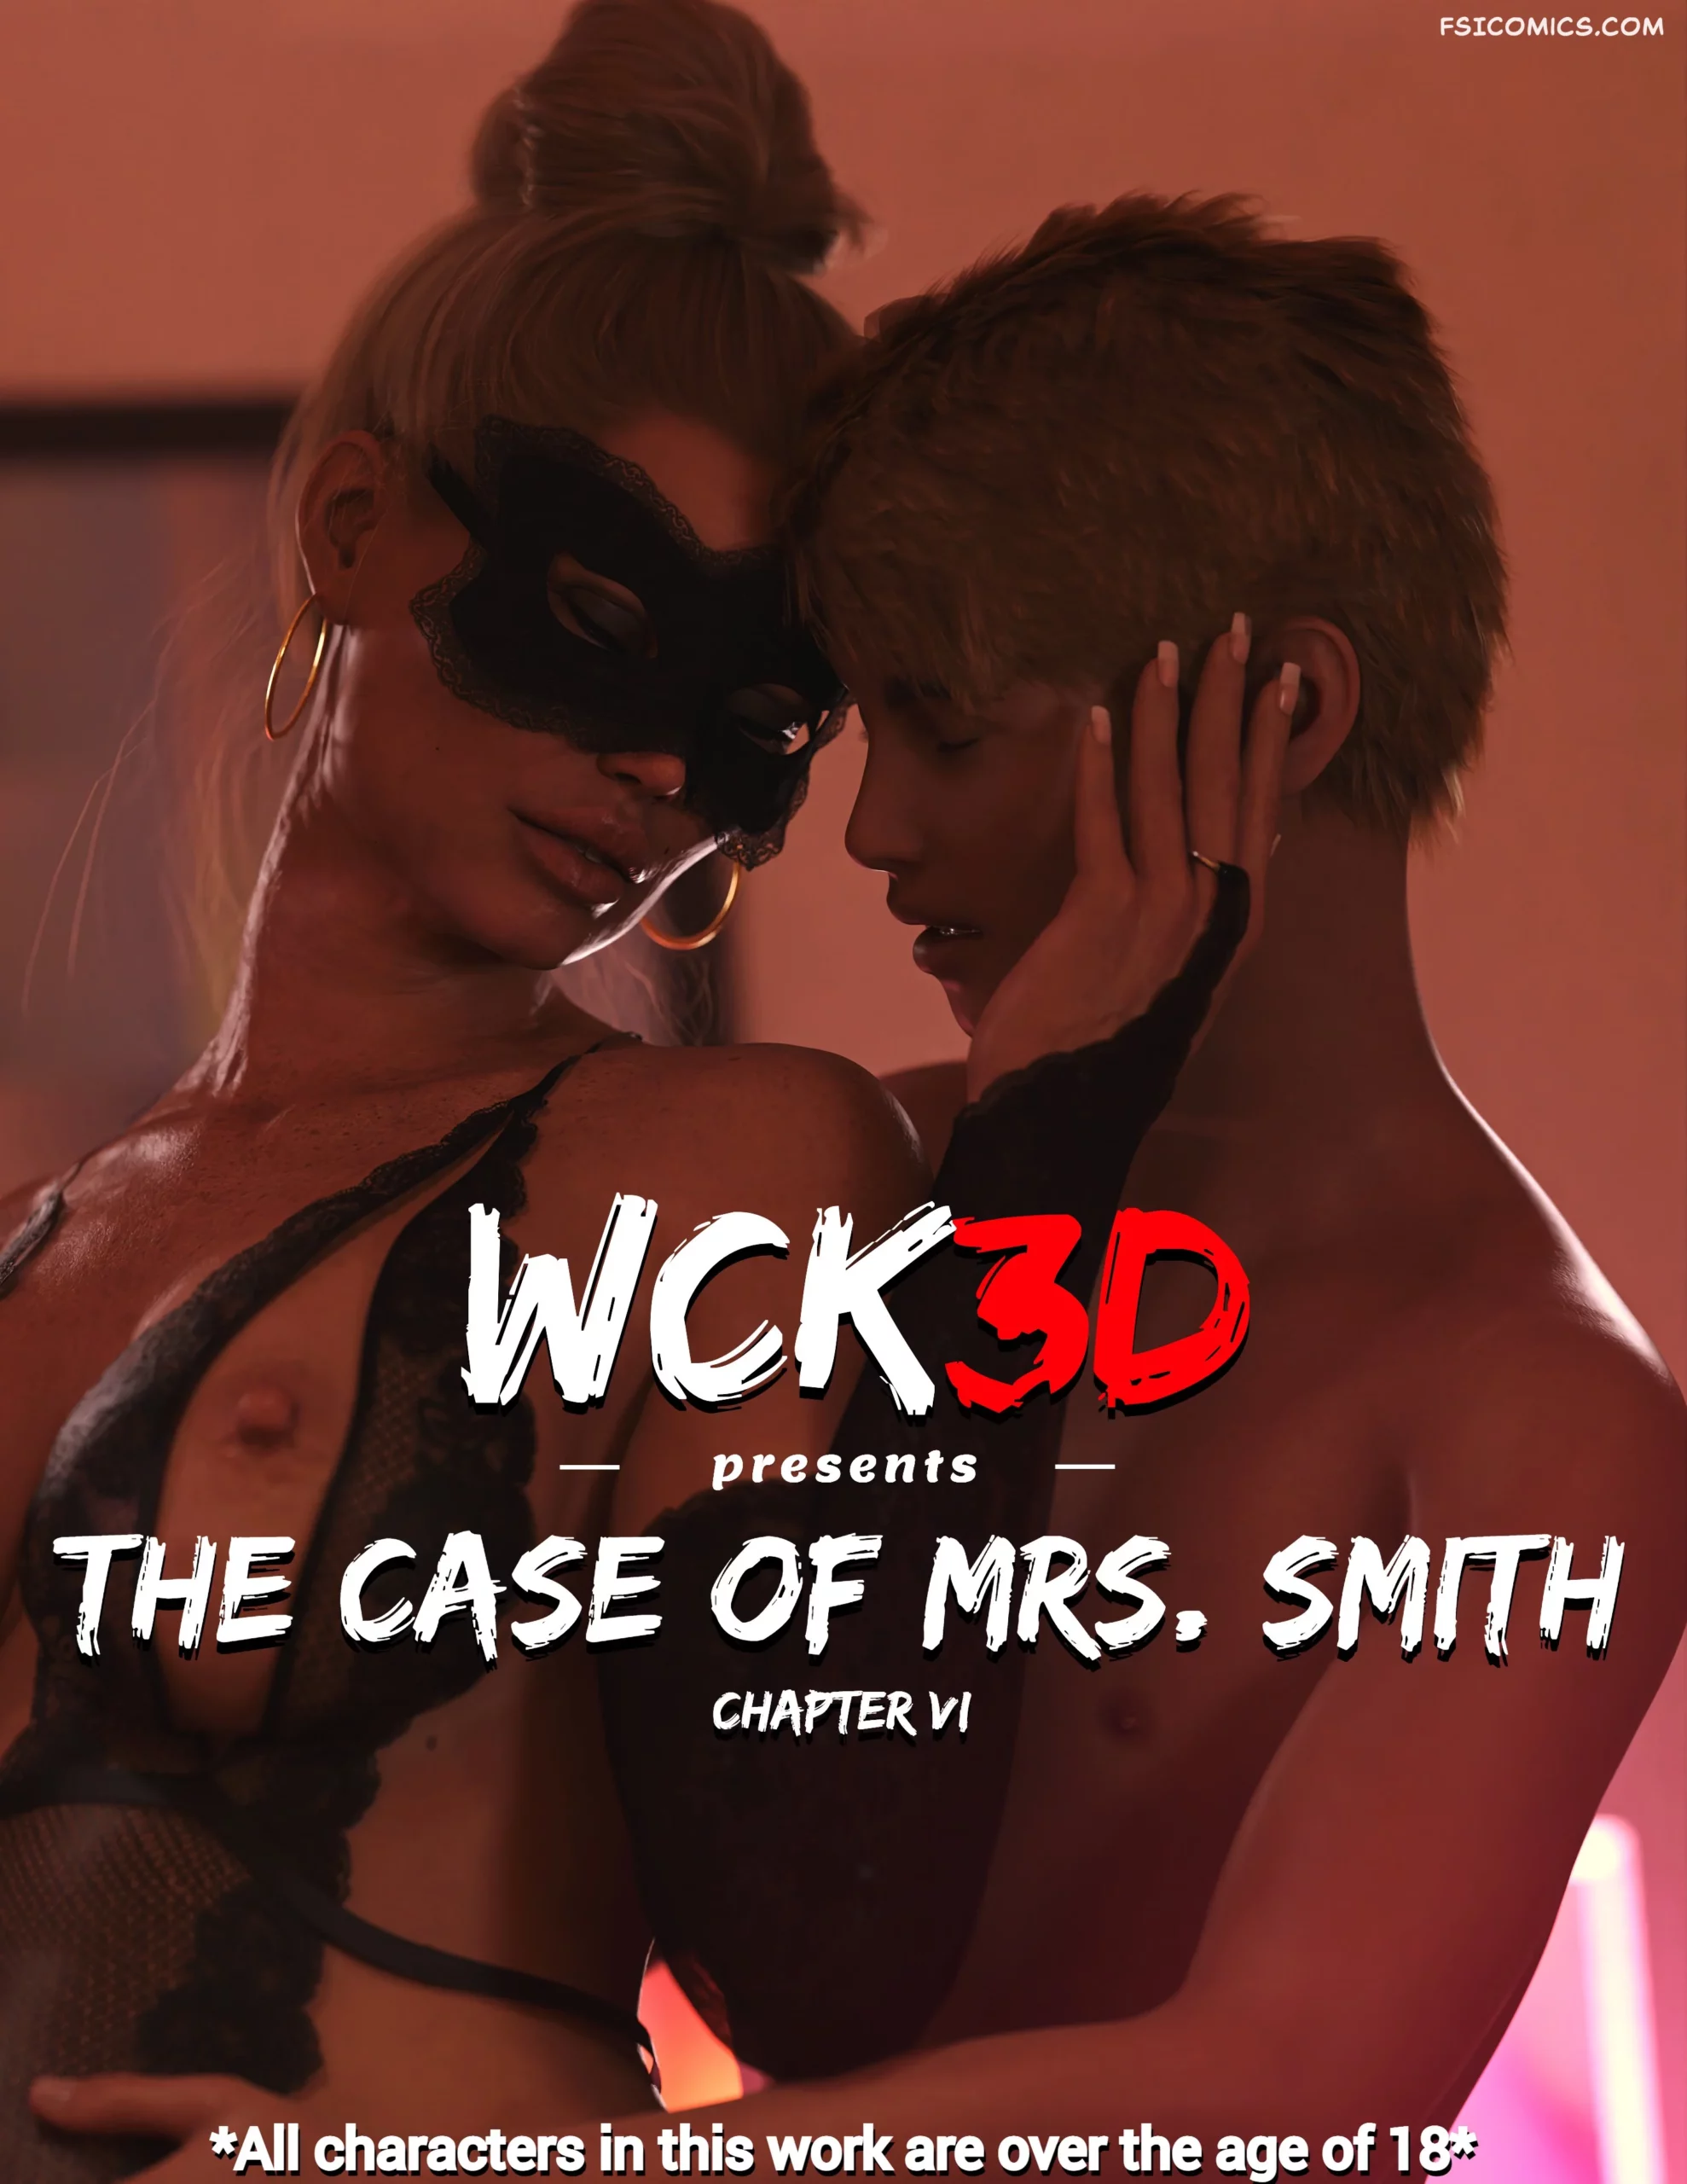 The Case Of Mrs Smith Chapter 6 – WCK3D - 11 - FSIComics